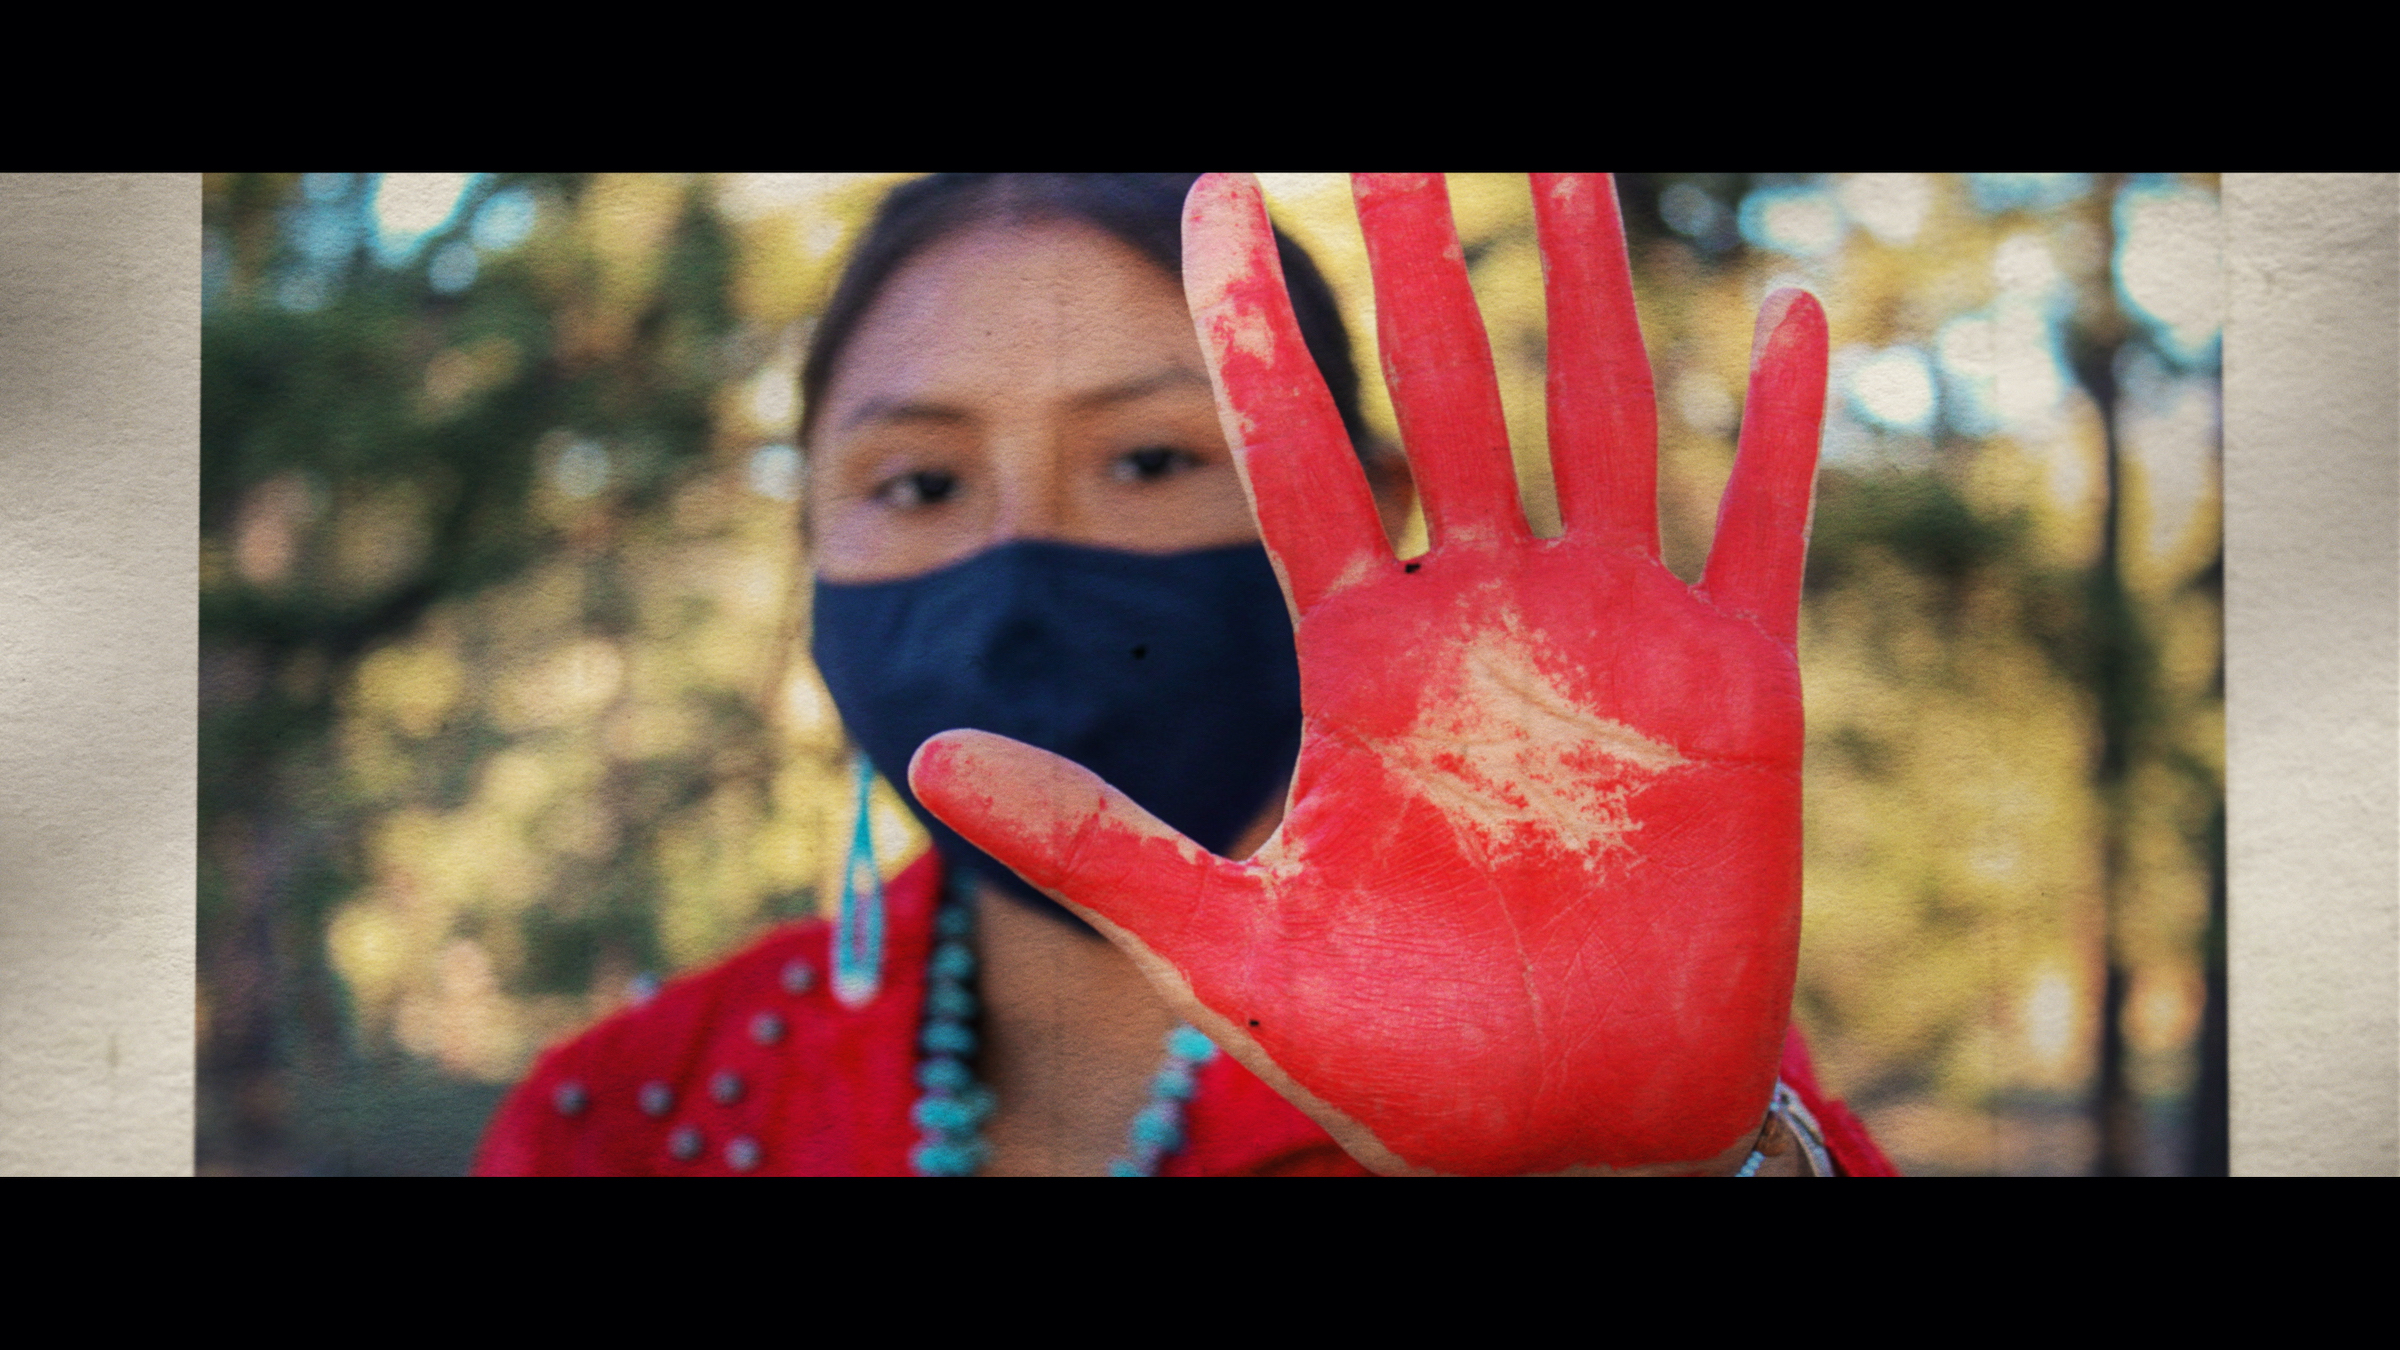 A young Native American woman wears red to support the Missing and Murdered Indigenous Women movement. (Courtesy of Showtime)